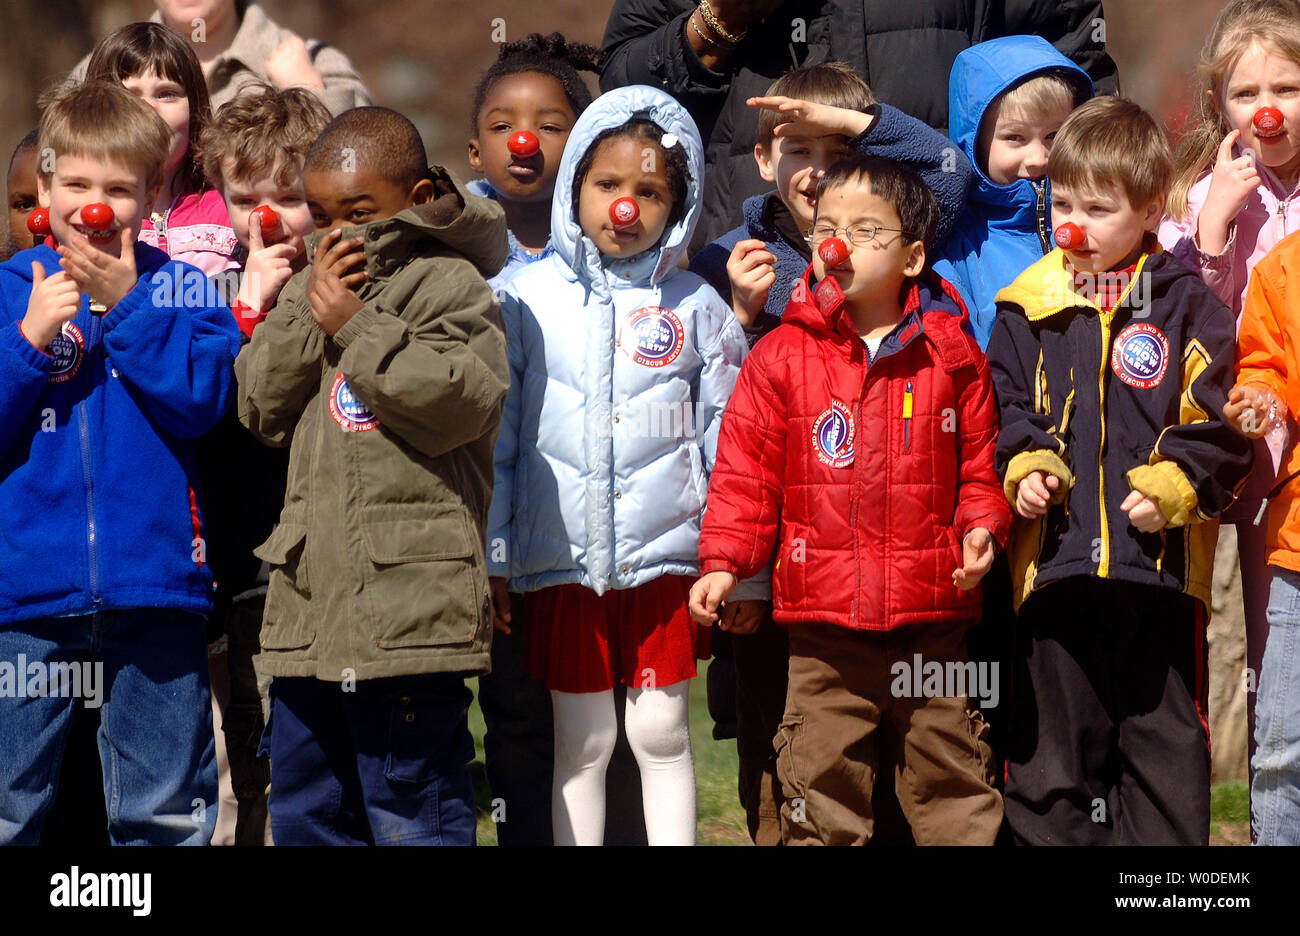 Children wearing red clown noses watch as the Ringling Brothers and Barnum Bailey Circus parade pass by, in Washington on March 19, 2007. The circus will be in the Washington area from March 22 to April 15. (UPI Photo/Kevin Dietsch) Stock Photo